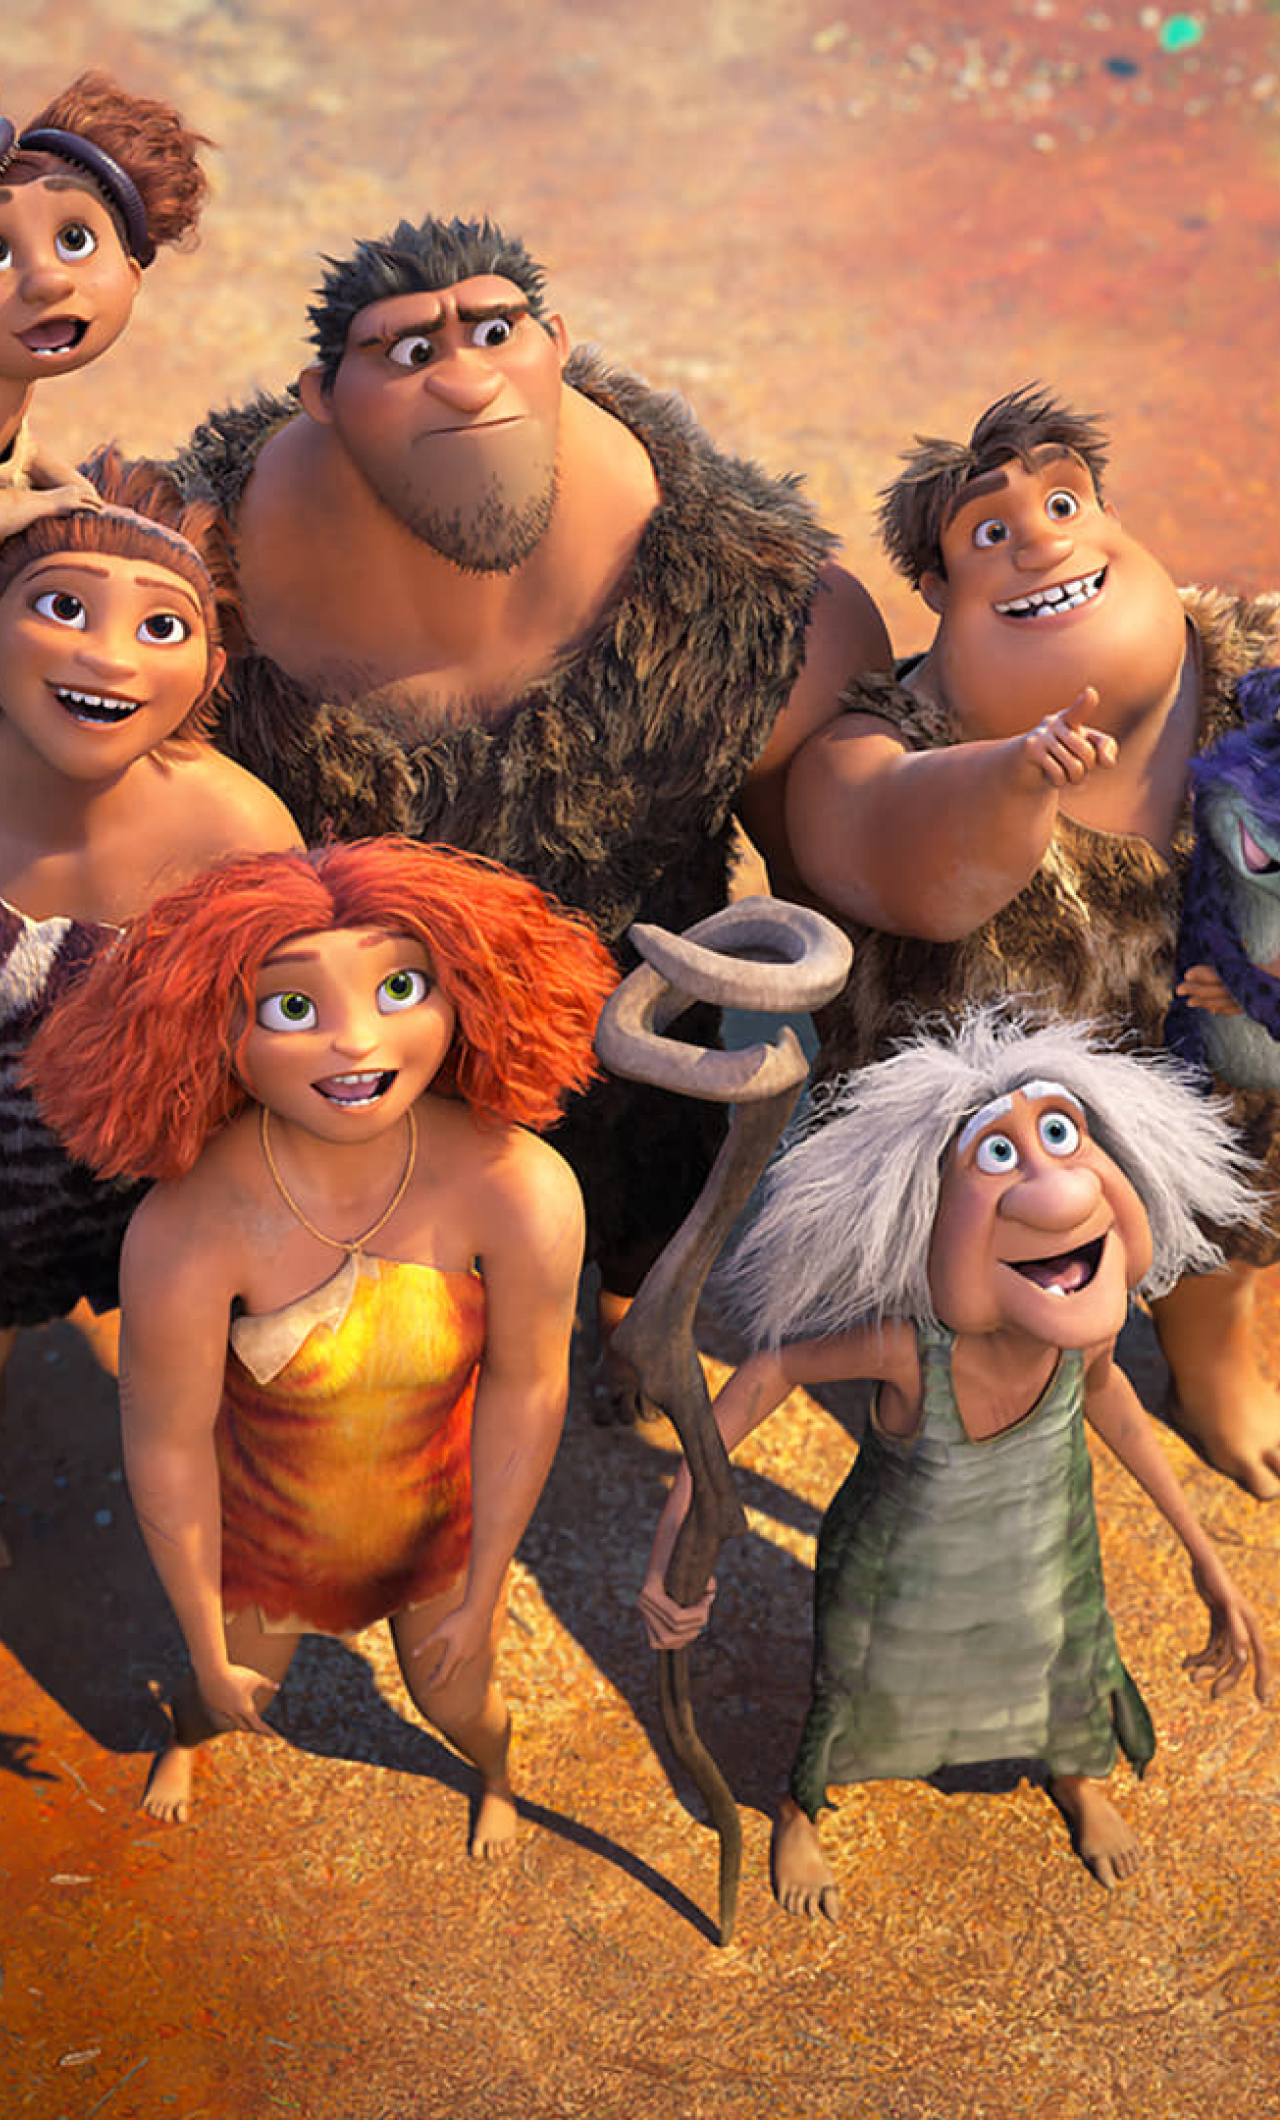 2020 The Croods: A New Age